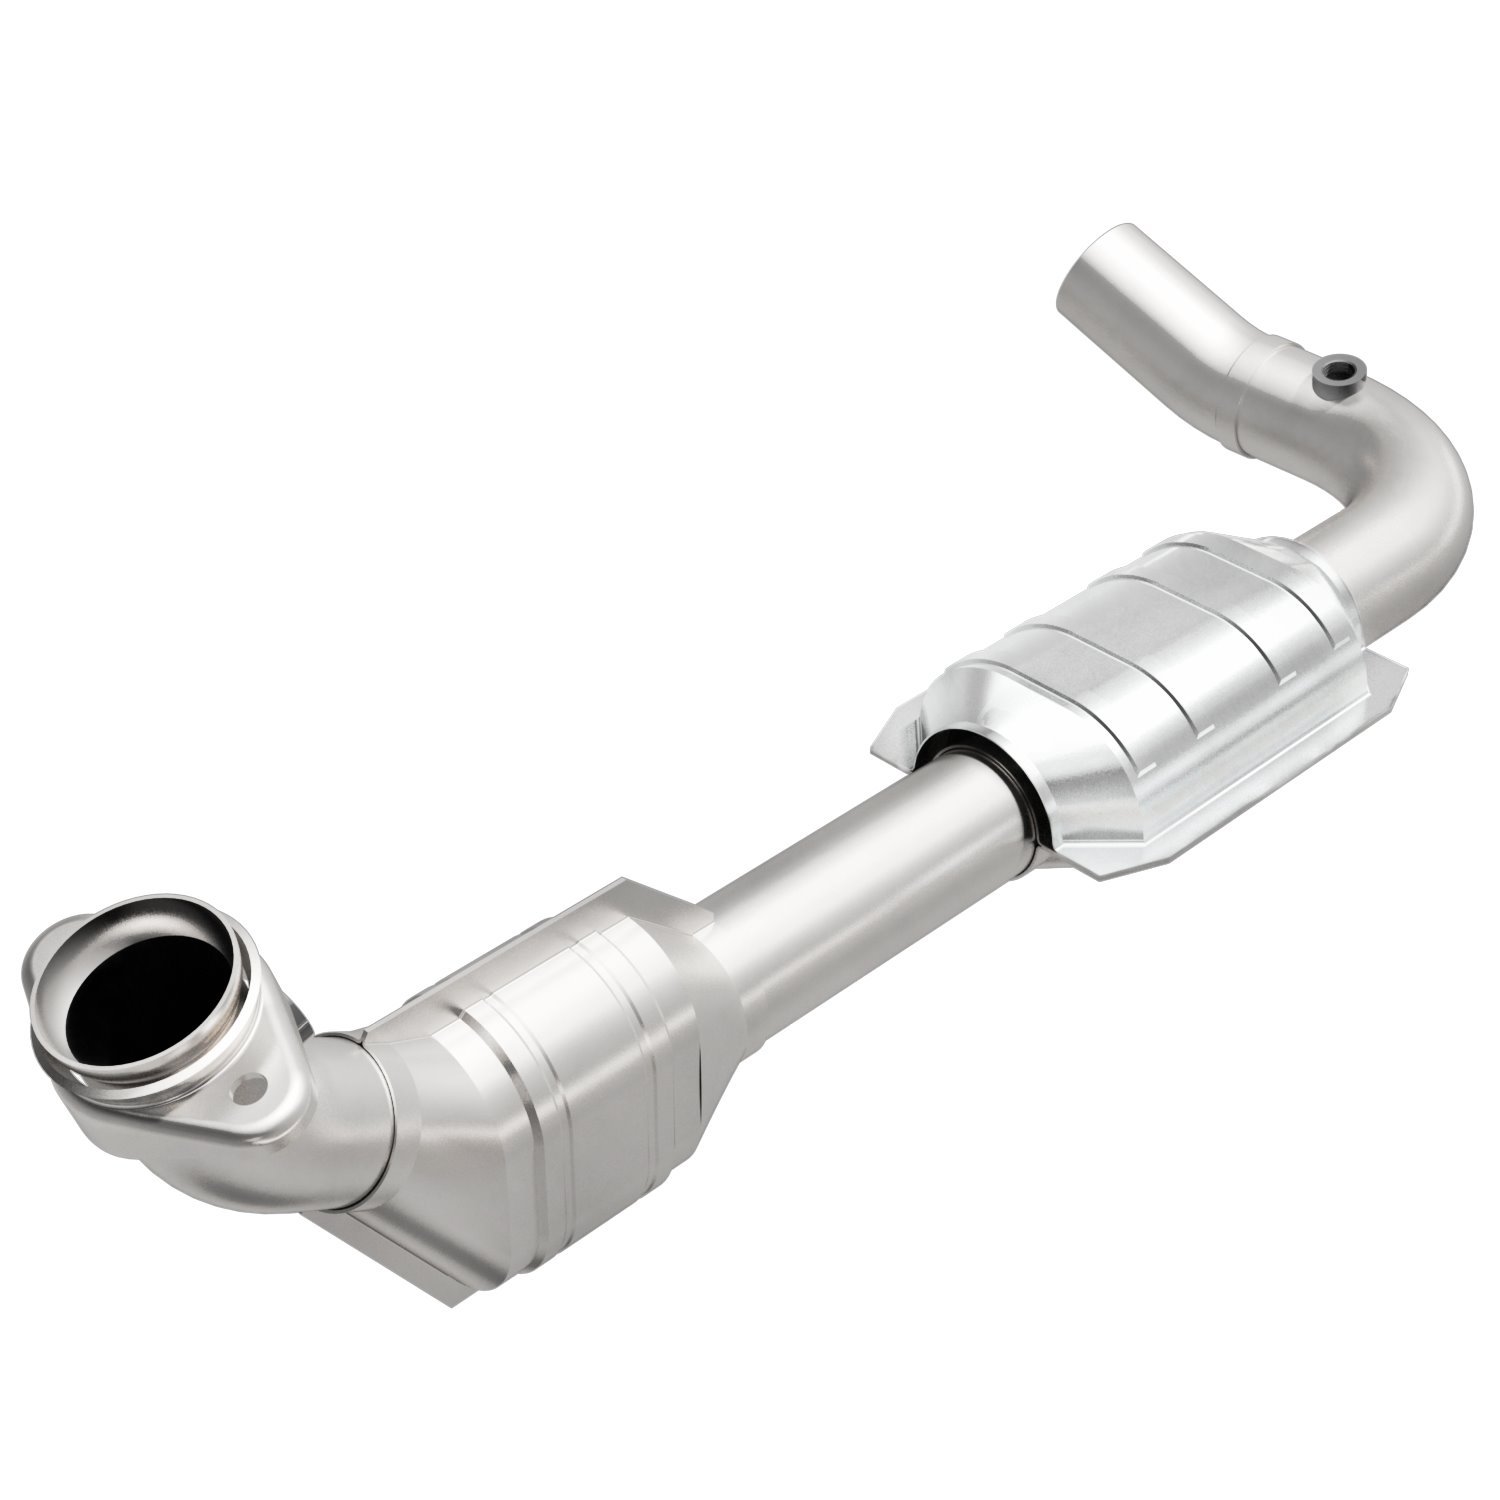 HM Grade Federal / EPA Compliant Direct-Fit Catalytic Converter 23132